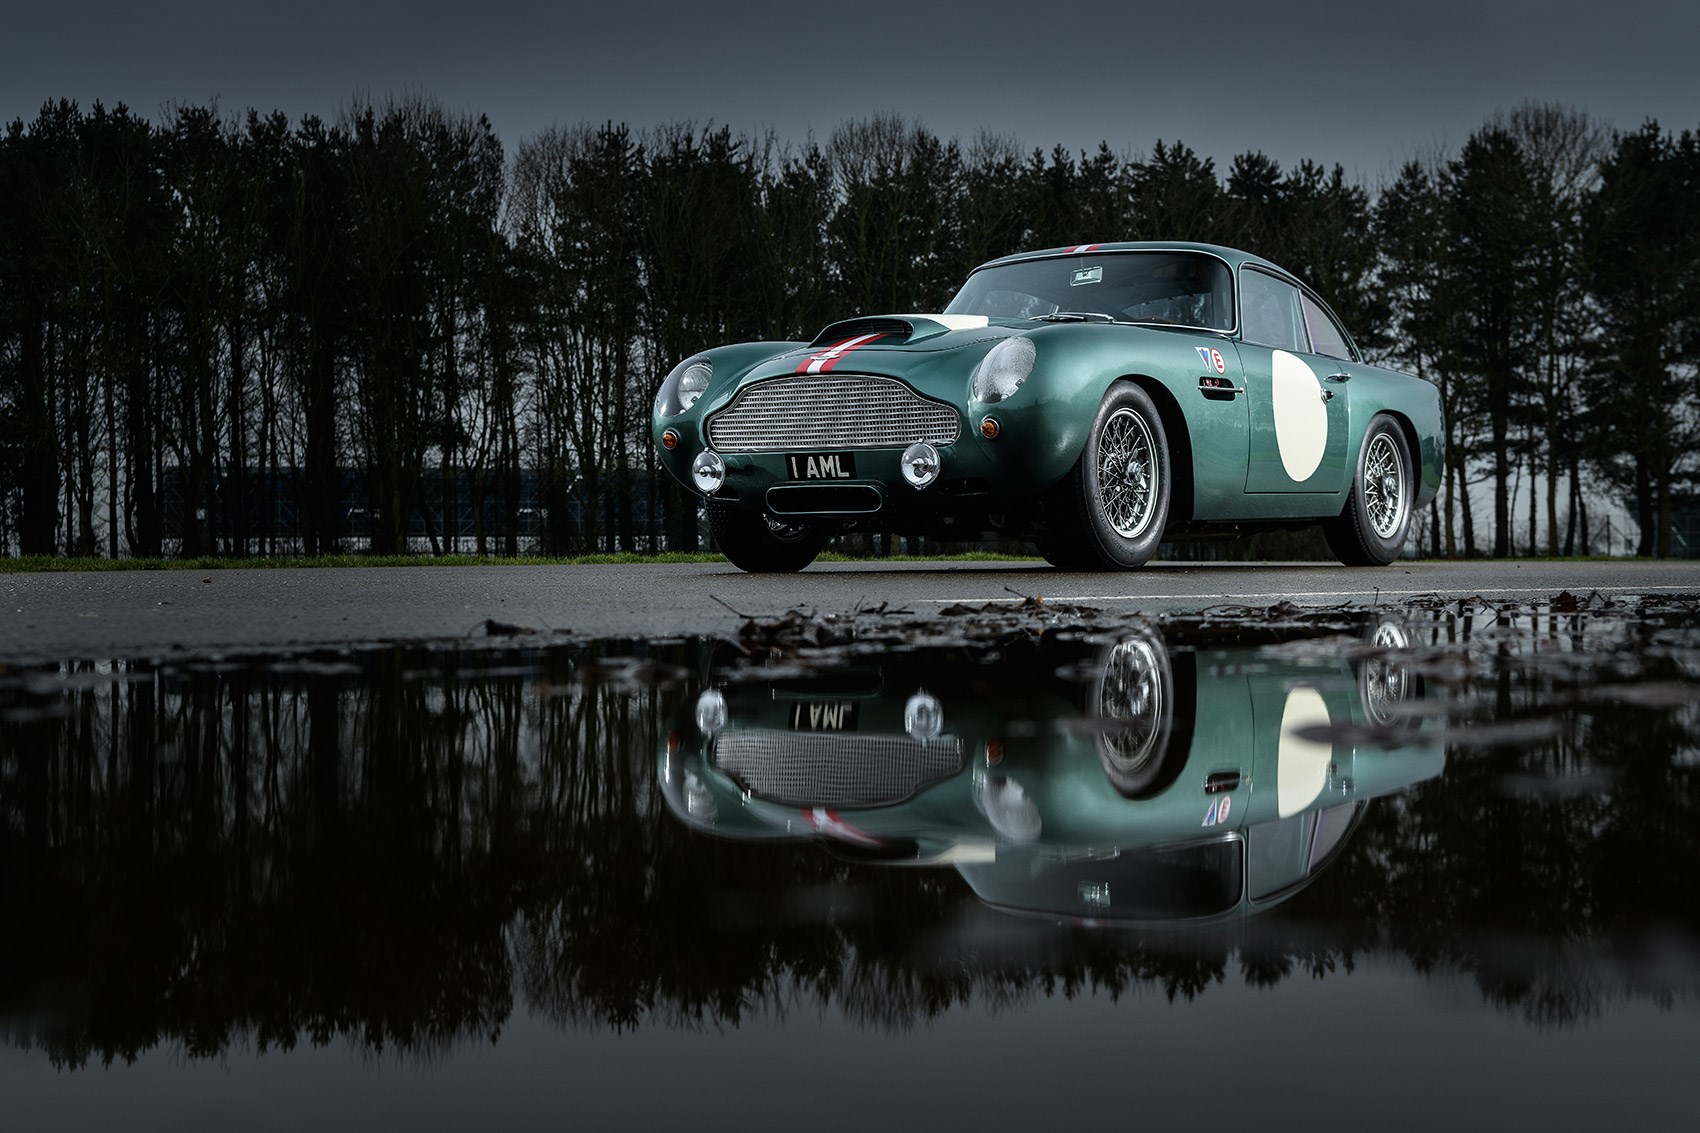 The new 2018 Aston DB4 GT Continuation sports car